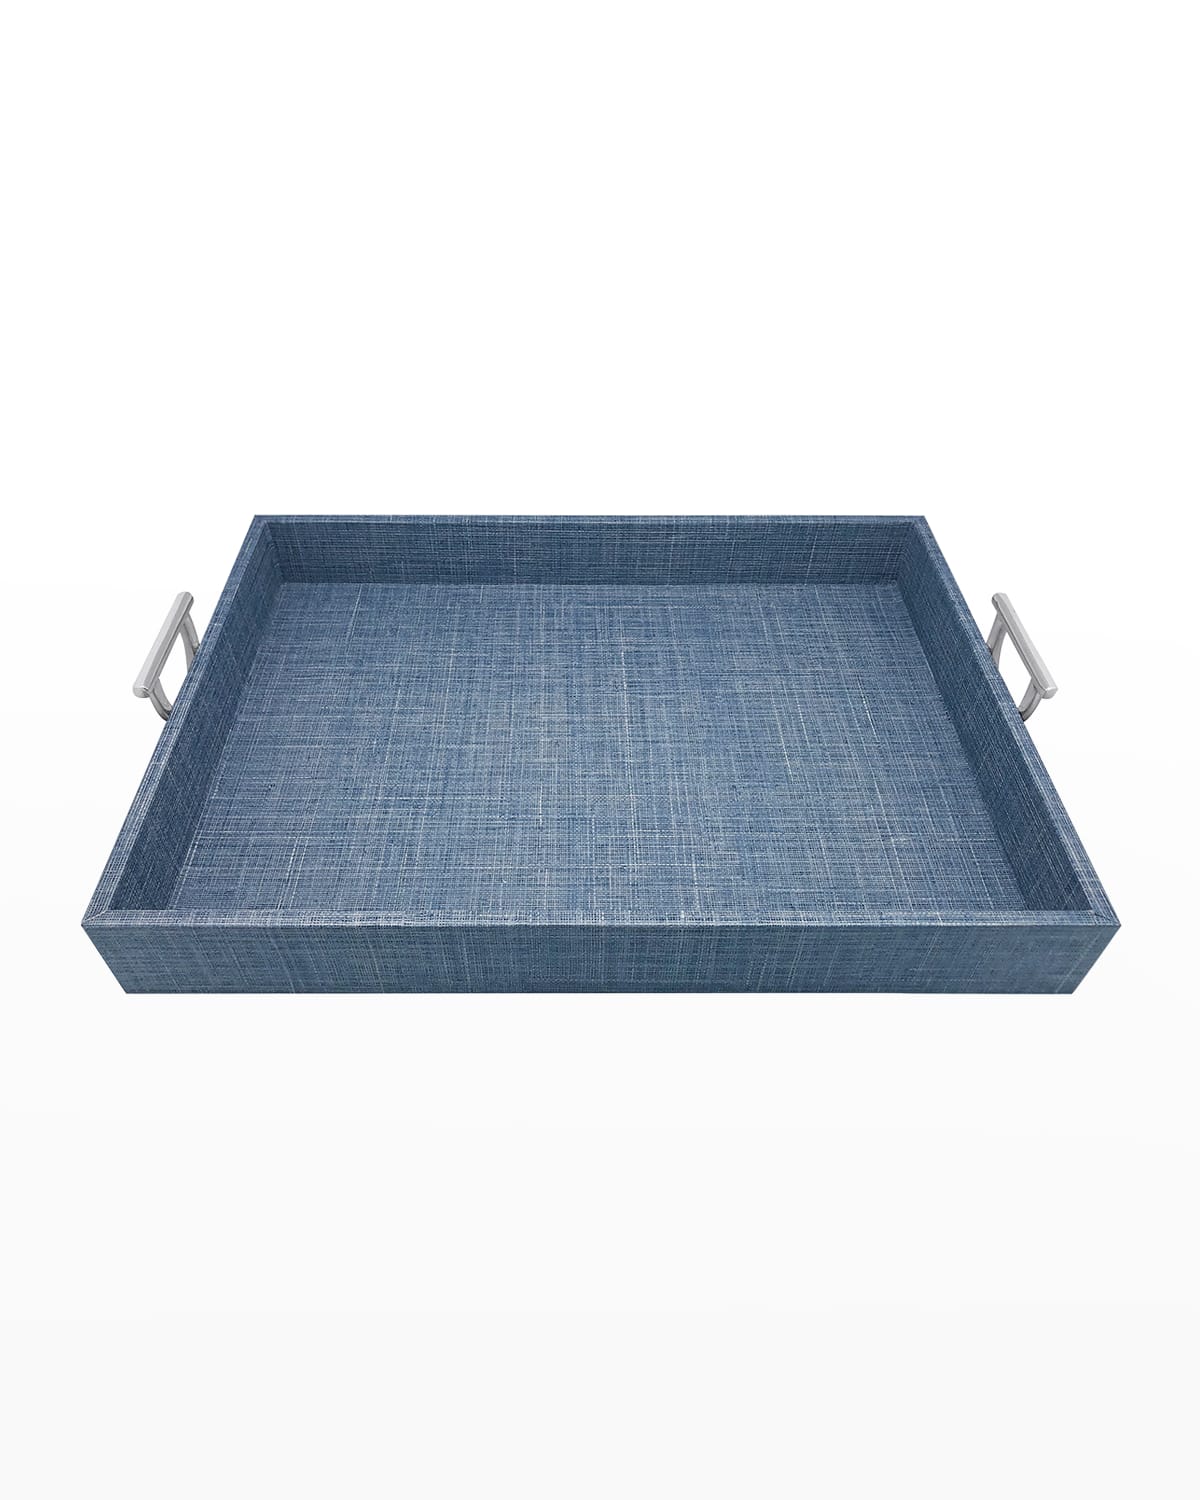 Mariposa Jute Tray With Metal Handles, Heather Blue